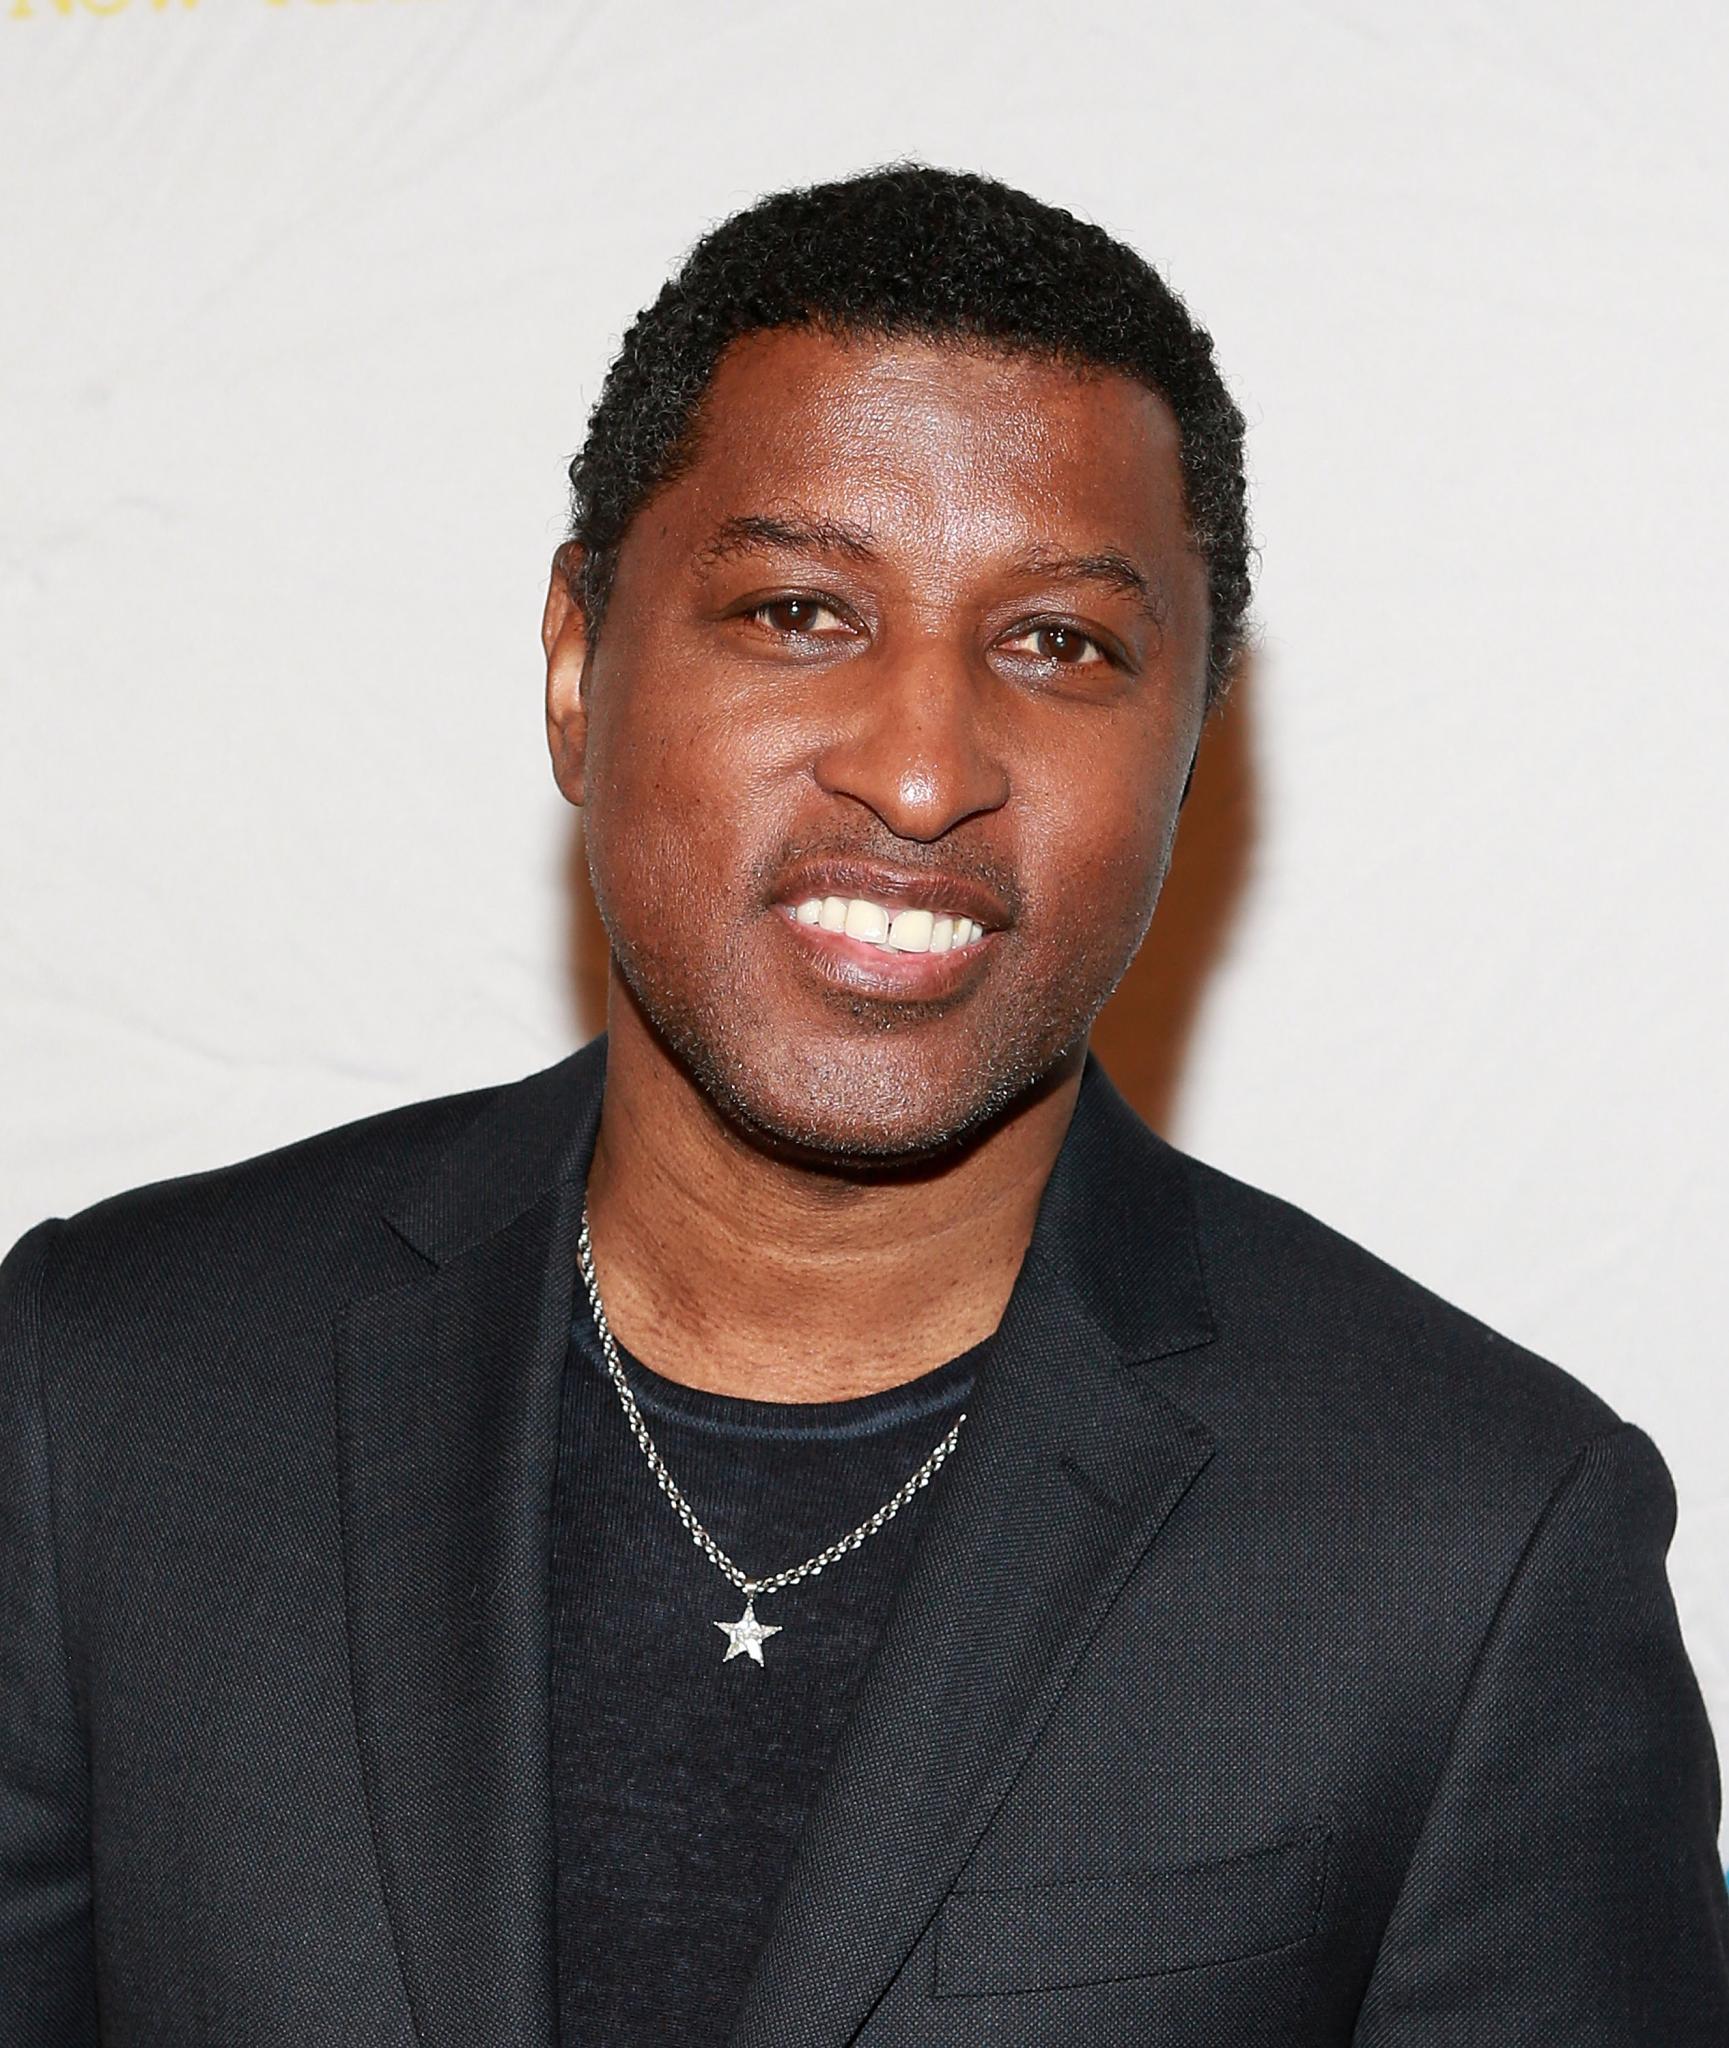 18 Classic Love Songs We Can Thank Babyface For - Essence